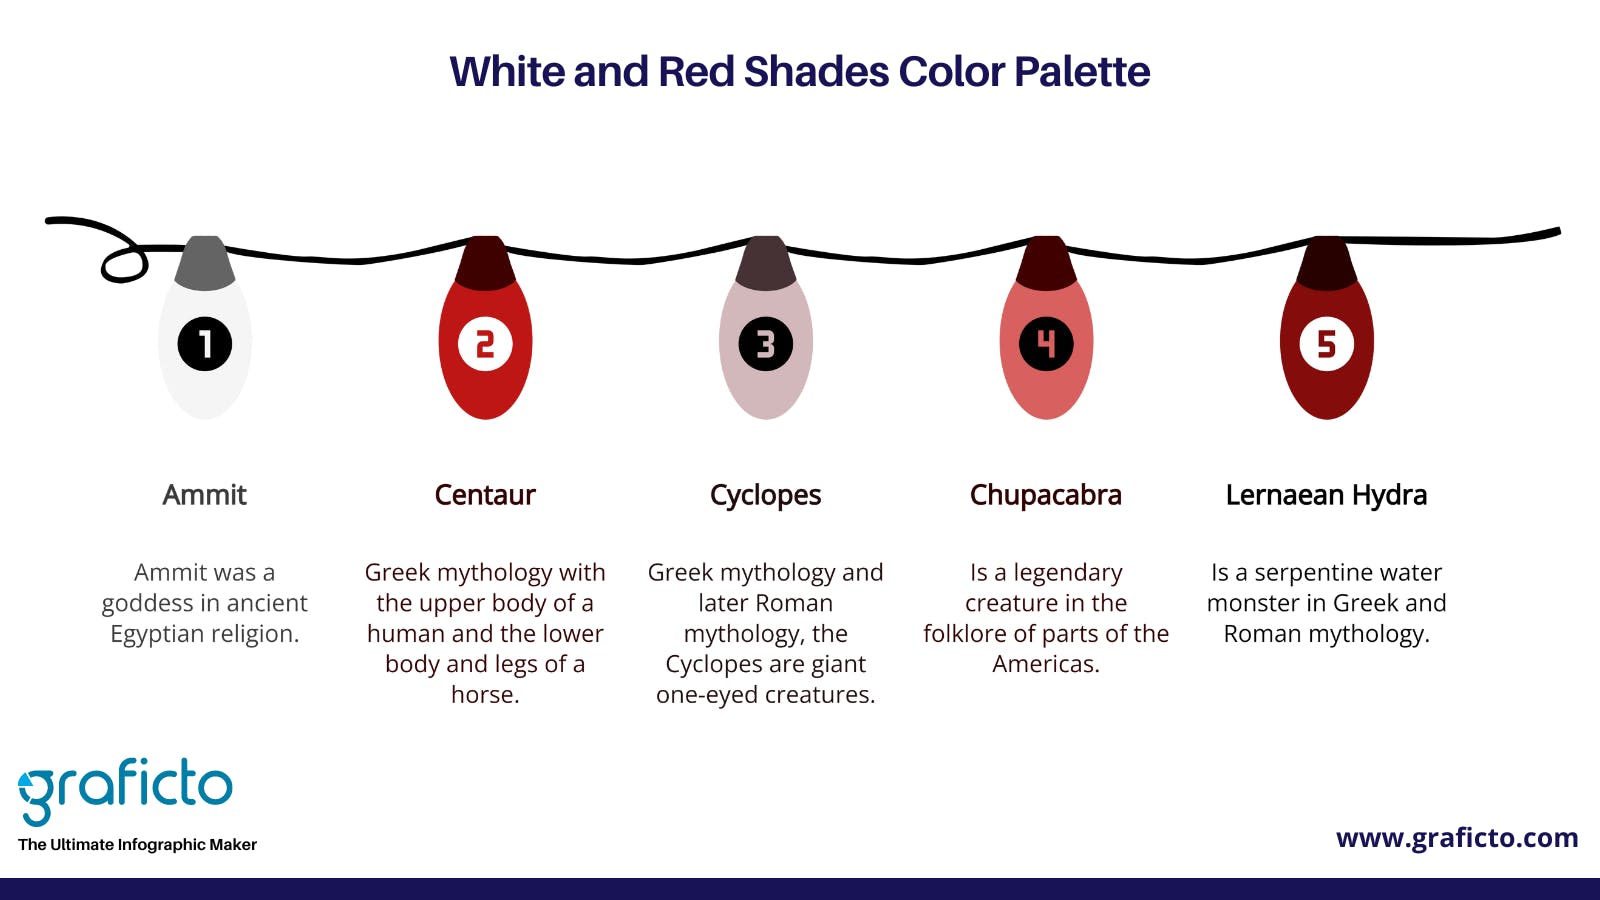 White and Red Shades graficto Christmas Color Palettes